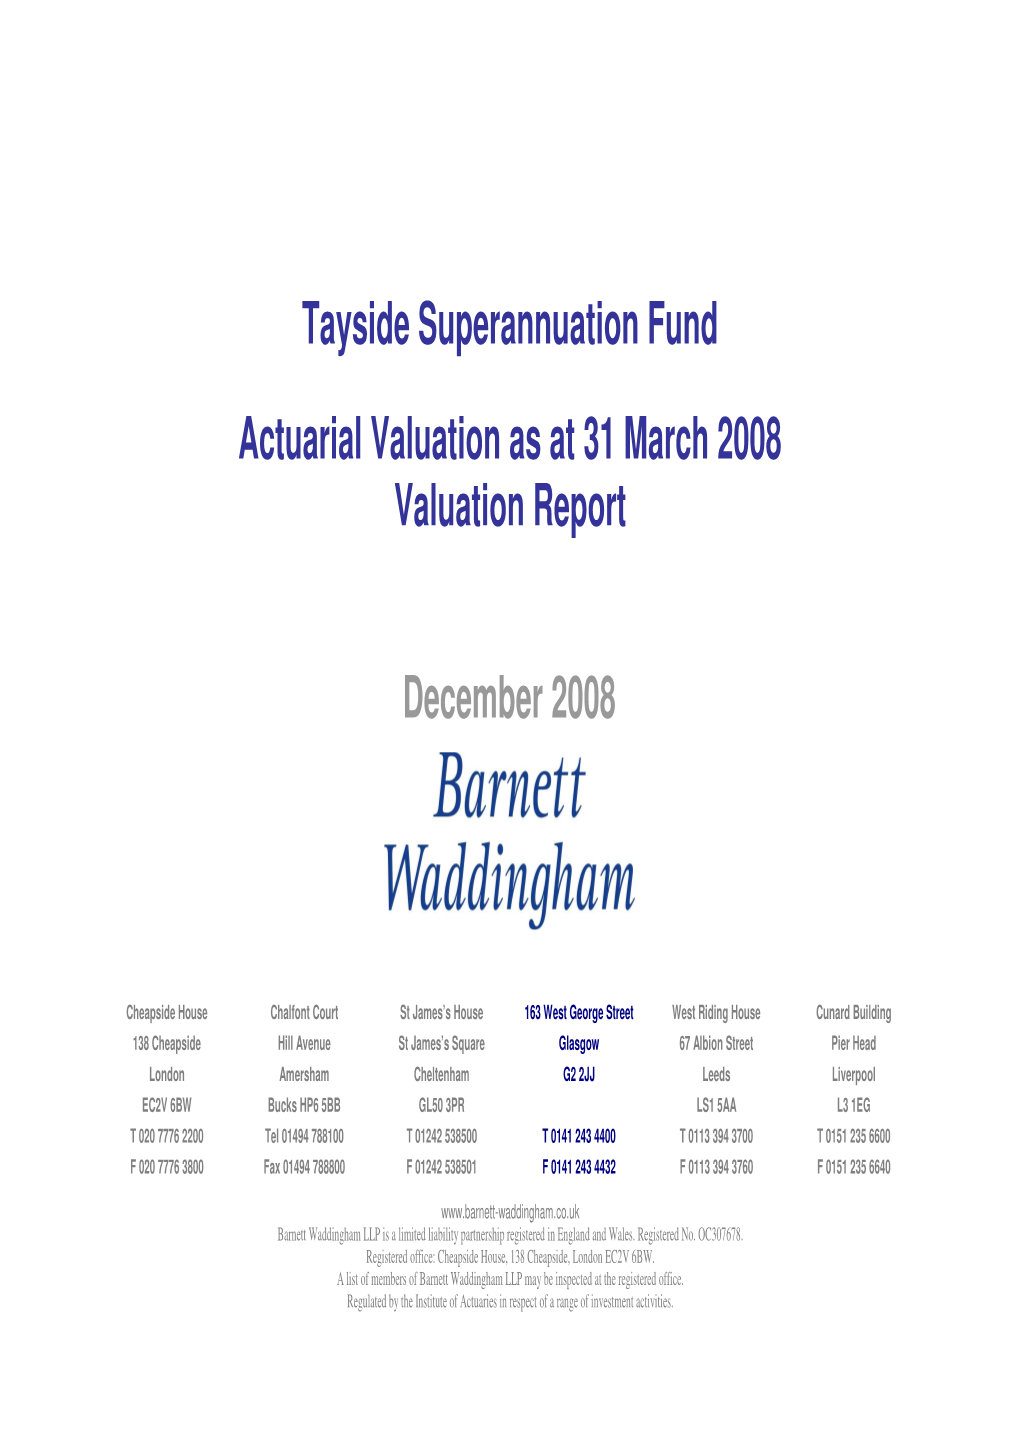 Tayside Superannuation Fund Actuarial Valuation As at 31 March